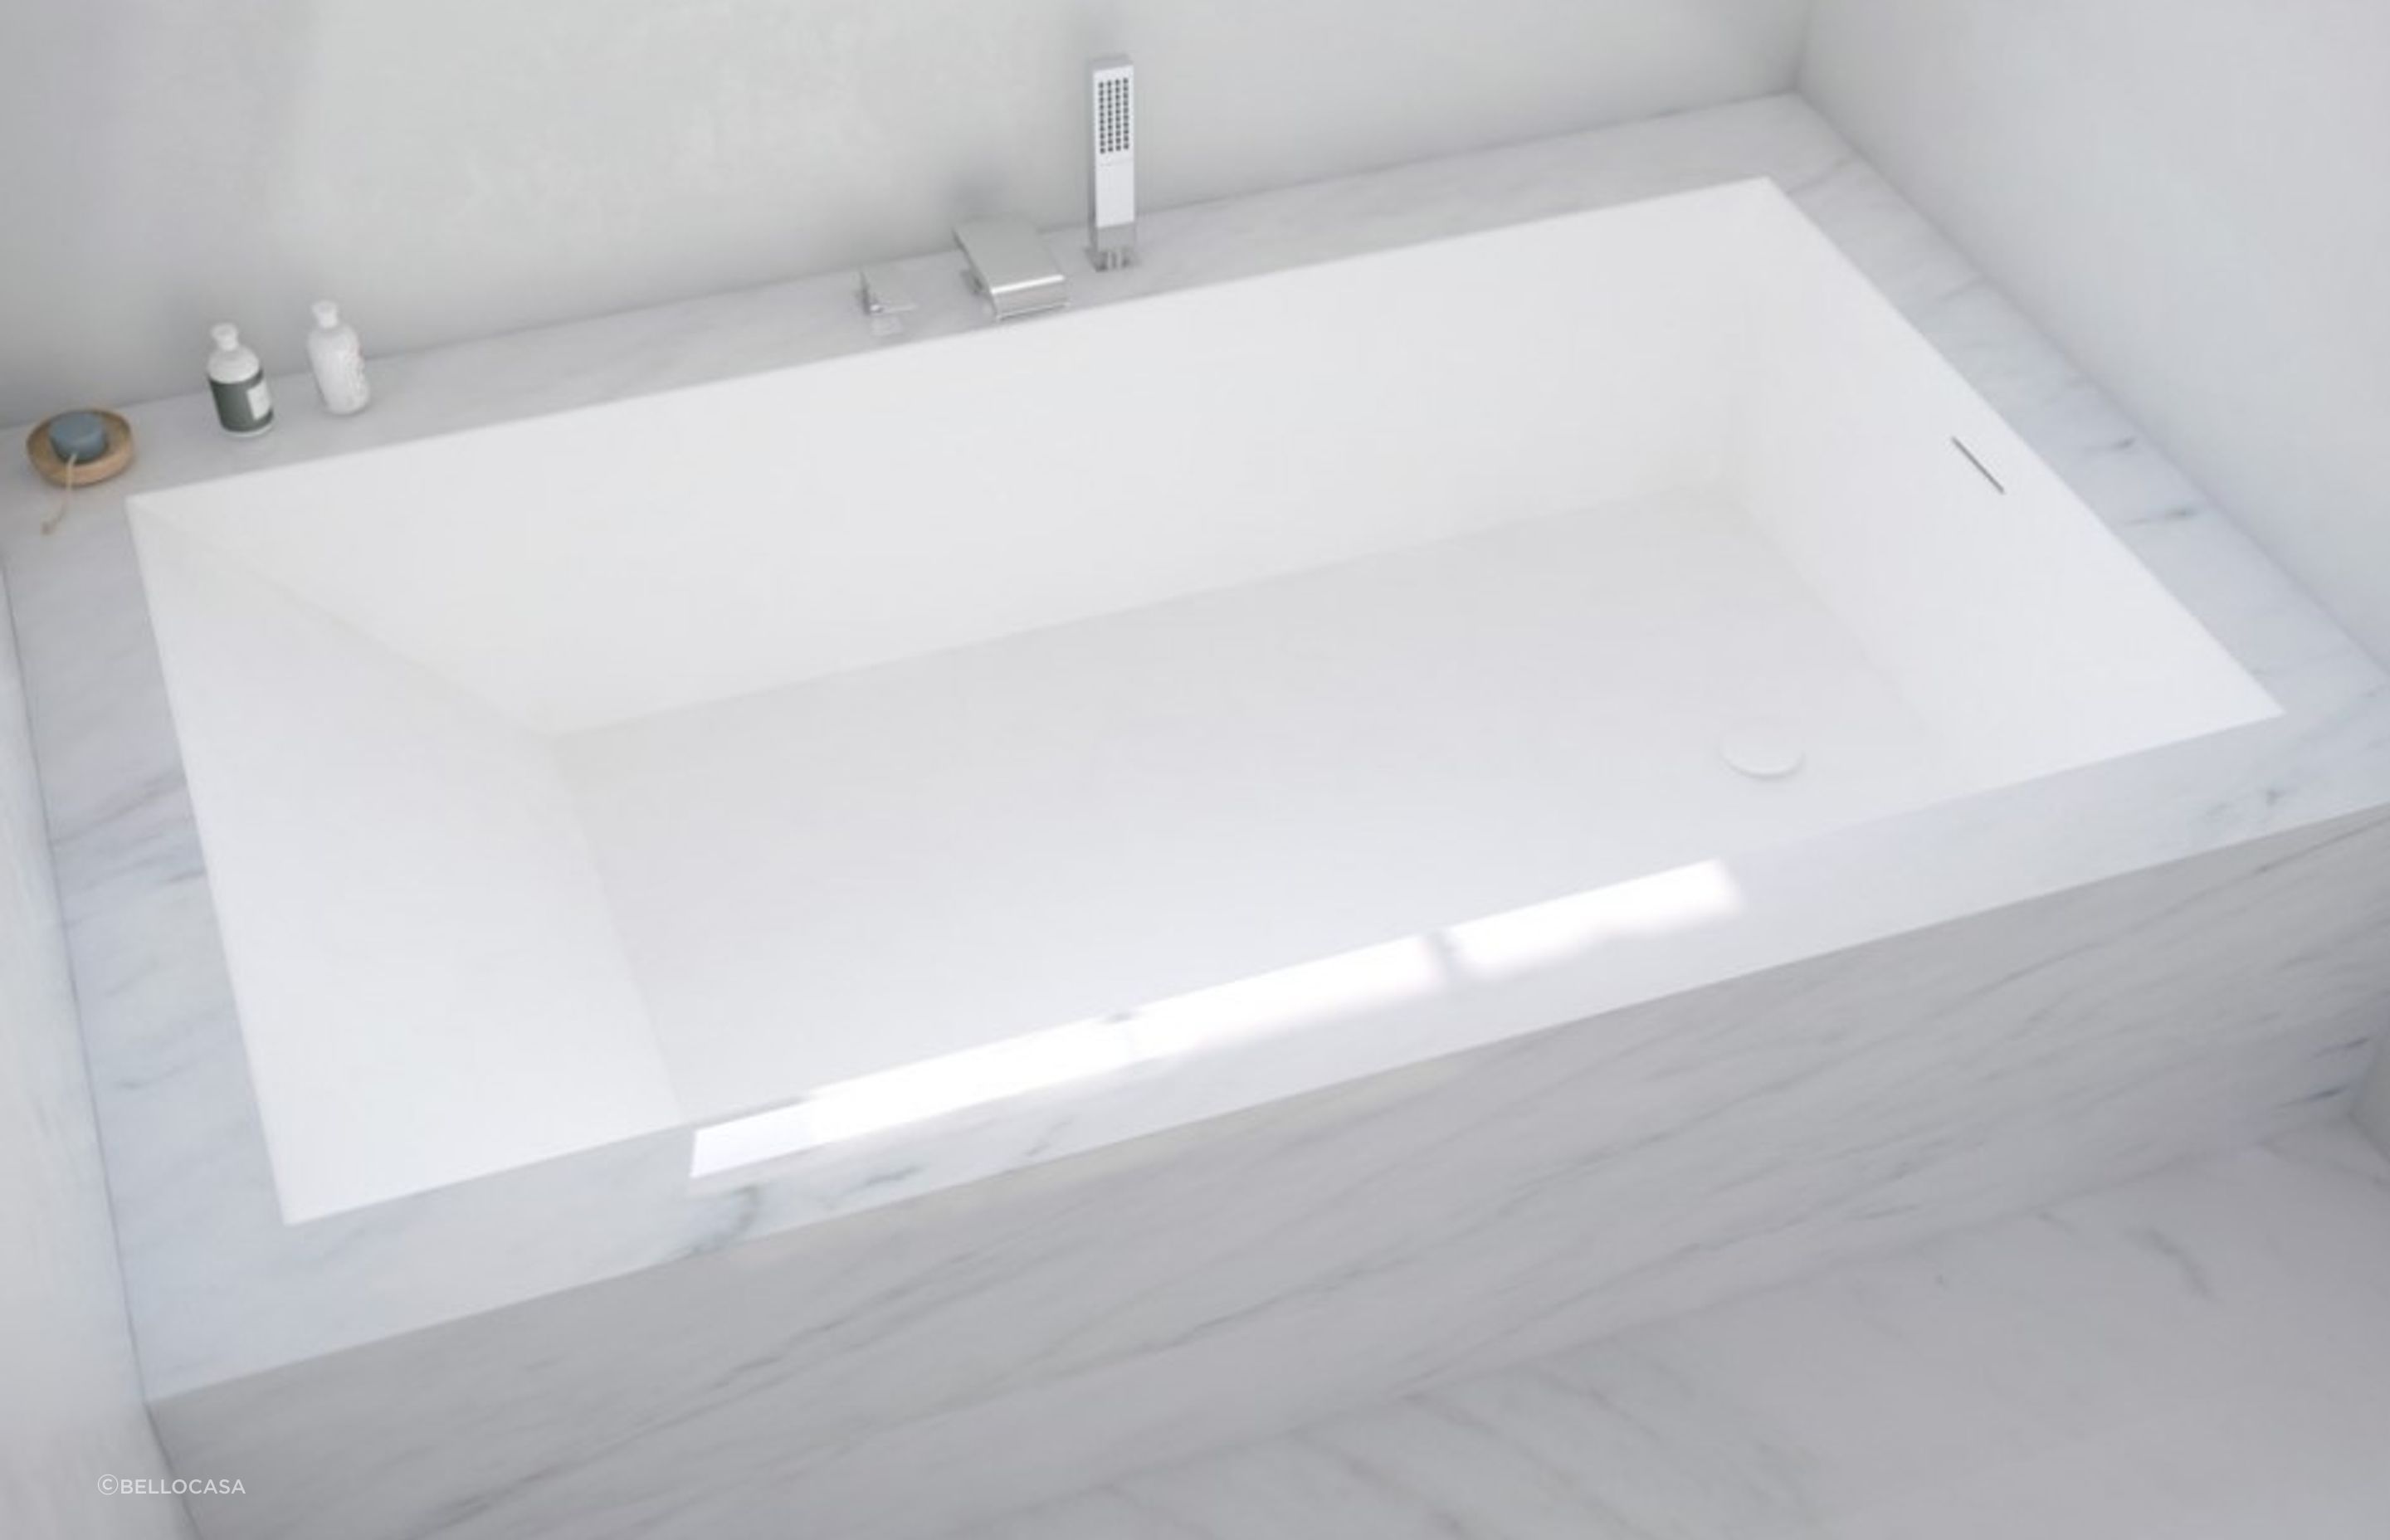 There are many design opportunities in and around built in baths, an exquisite example here featuring the Cube Built-in Bath